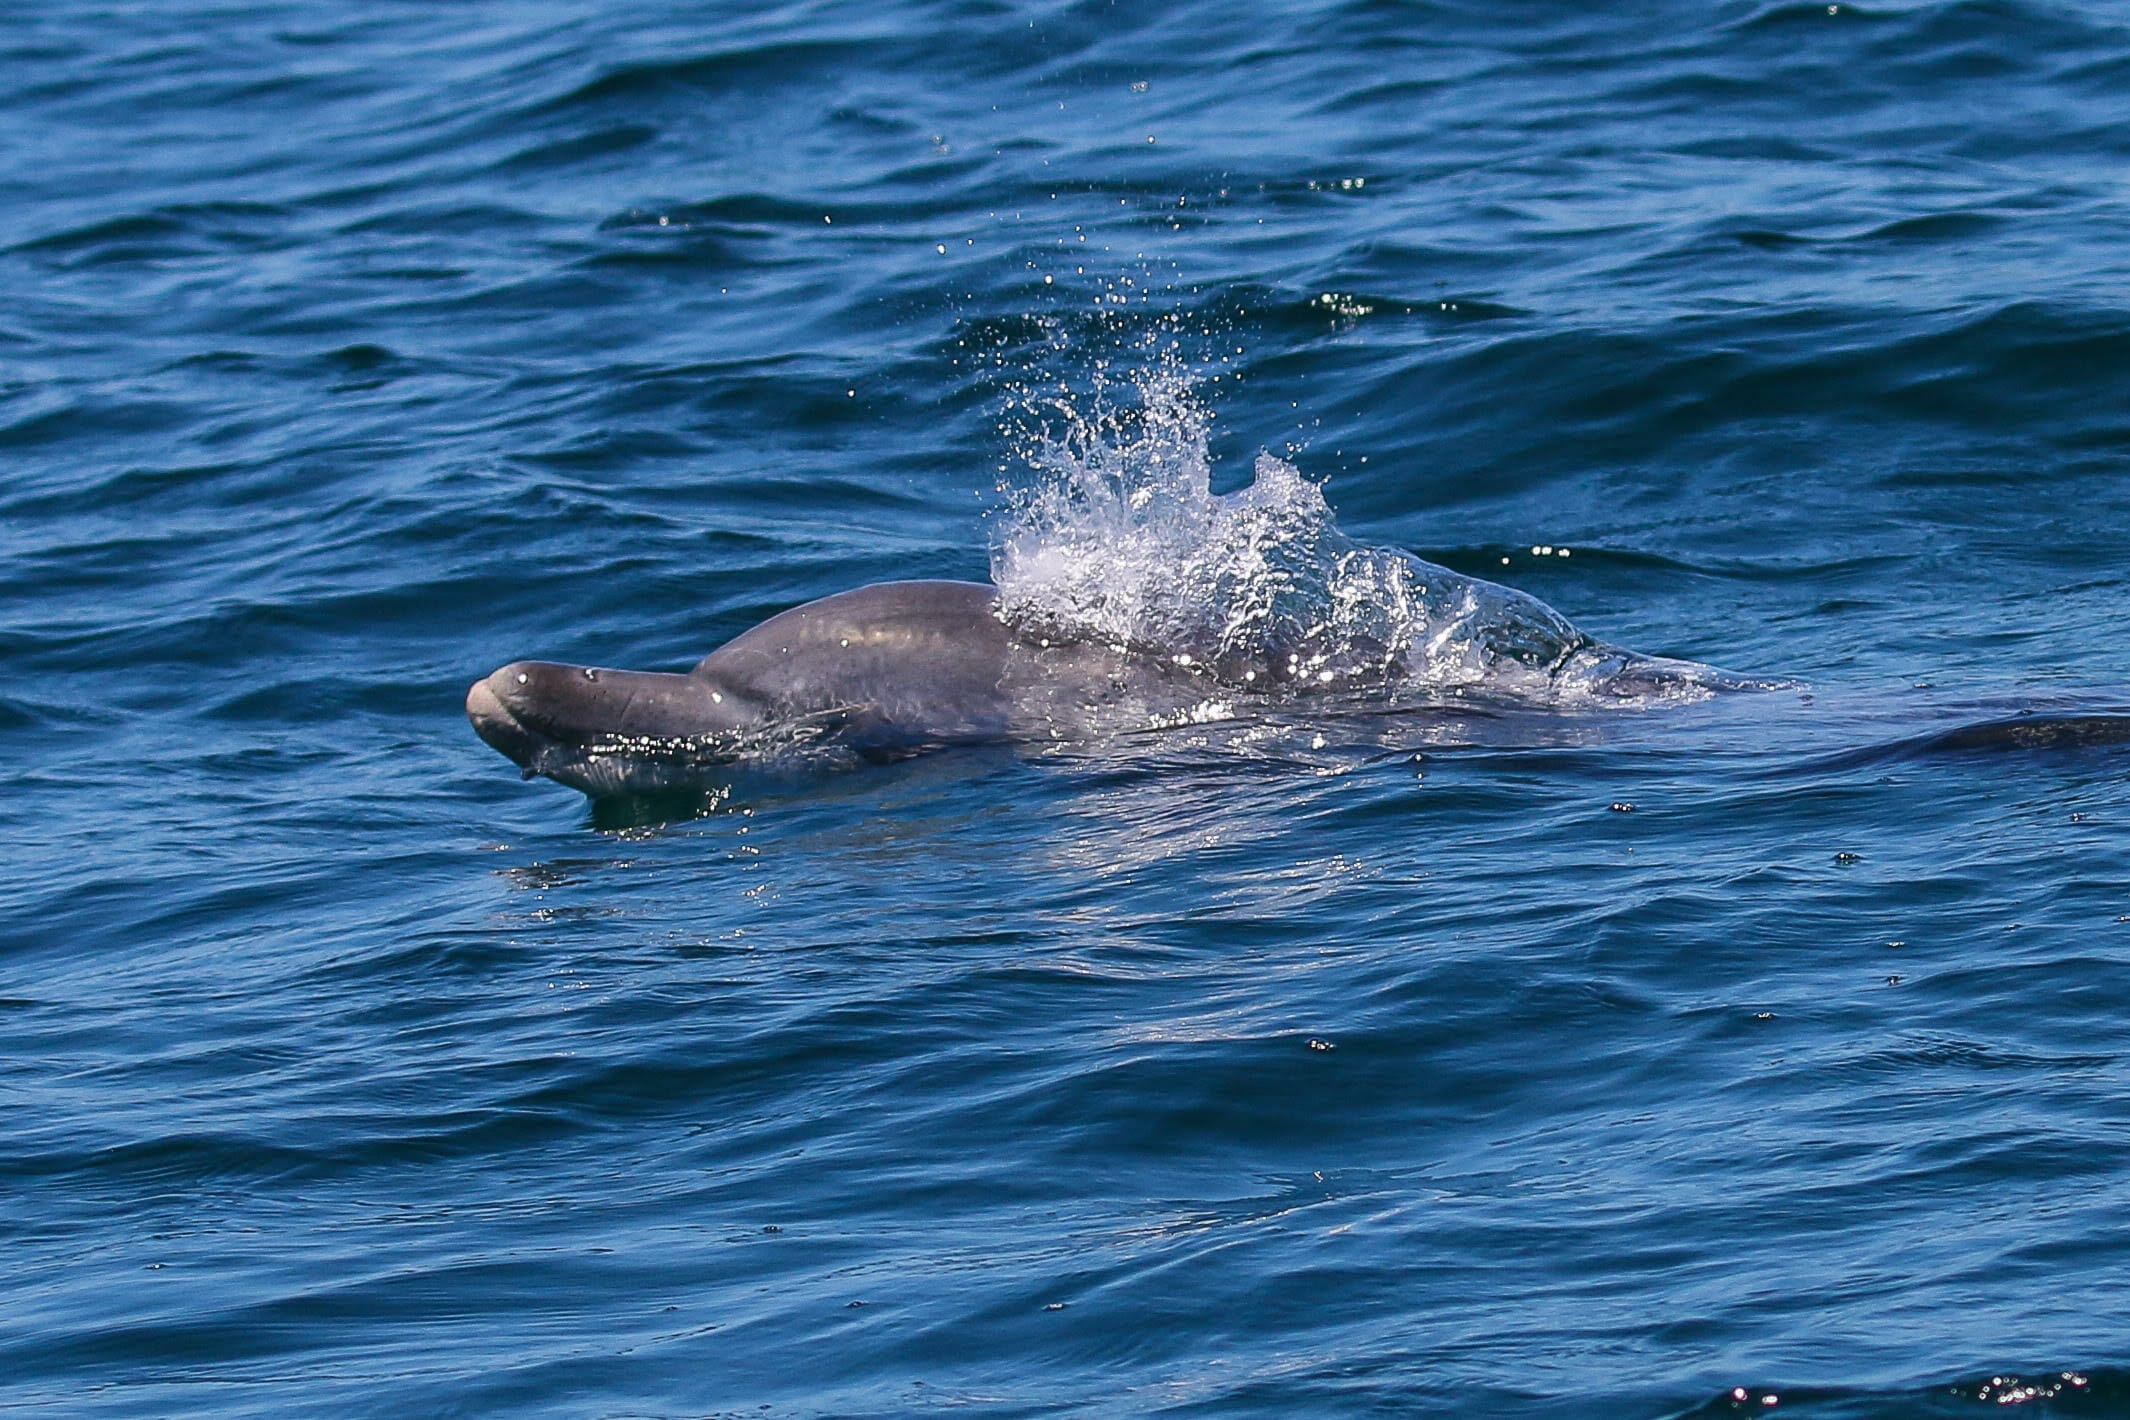 Bottlenose dolphin in King George Sound Photo Credit: Kirsty Alexander